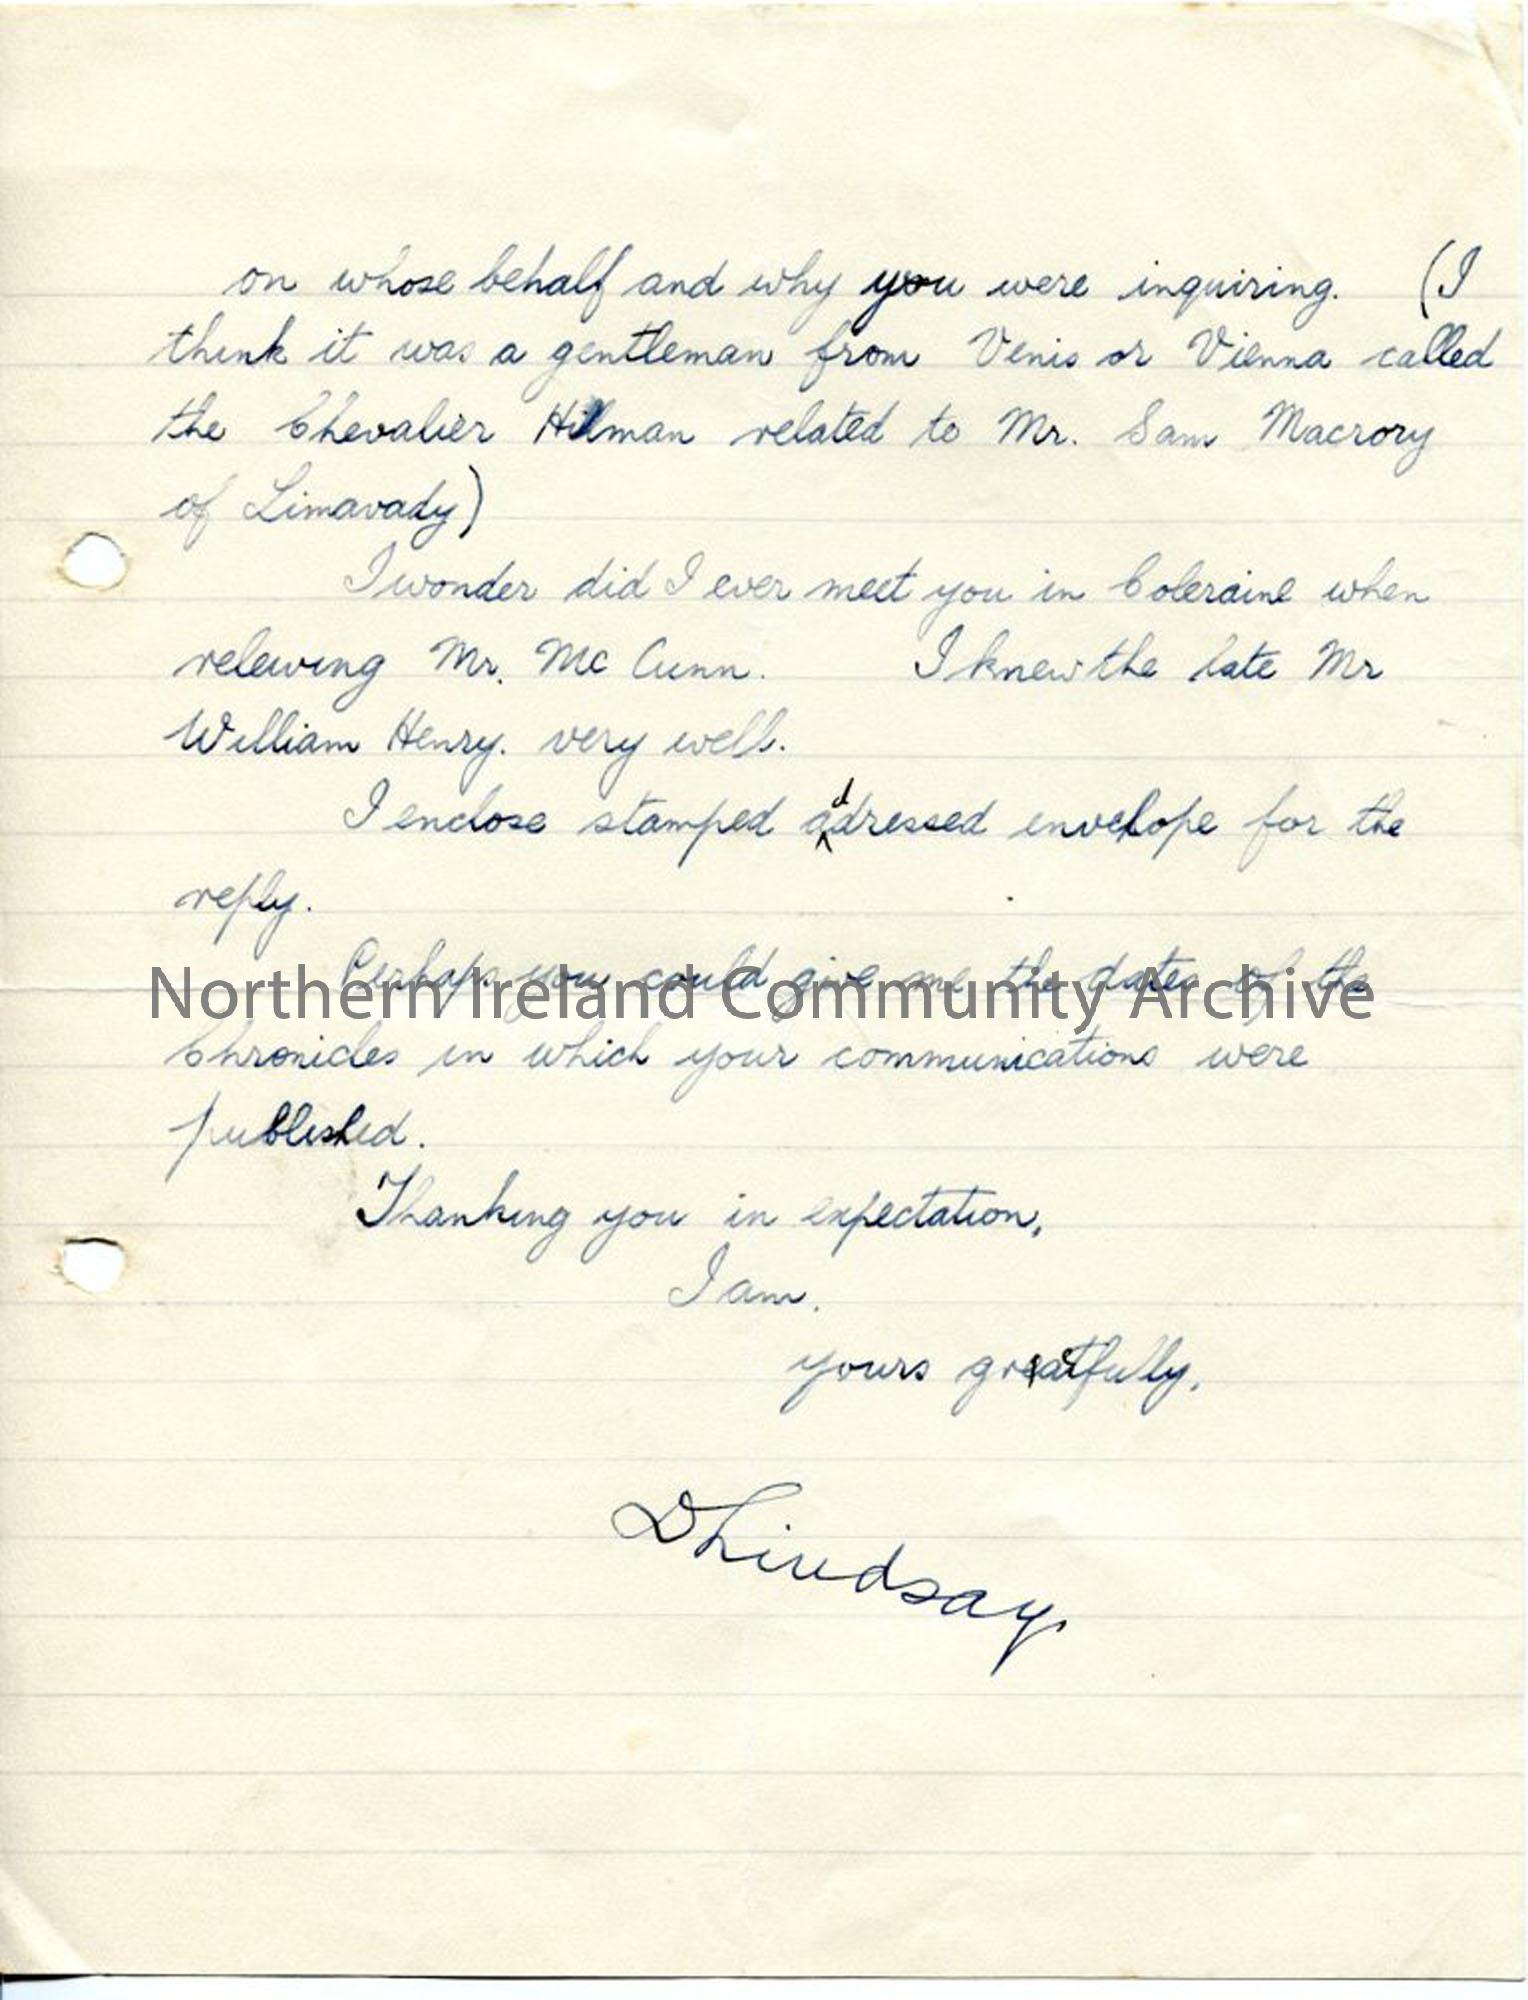 Page 2 of 2 – Letter from David Lindsey, 14.11.1933